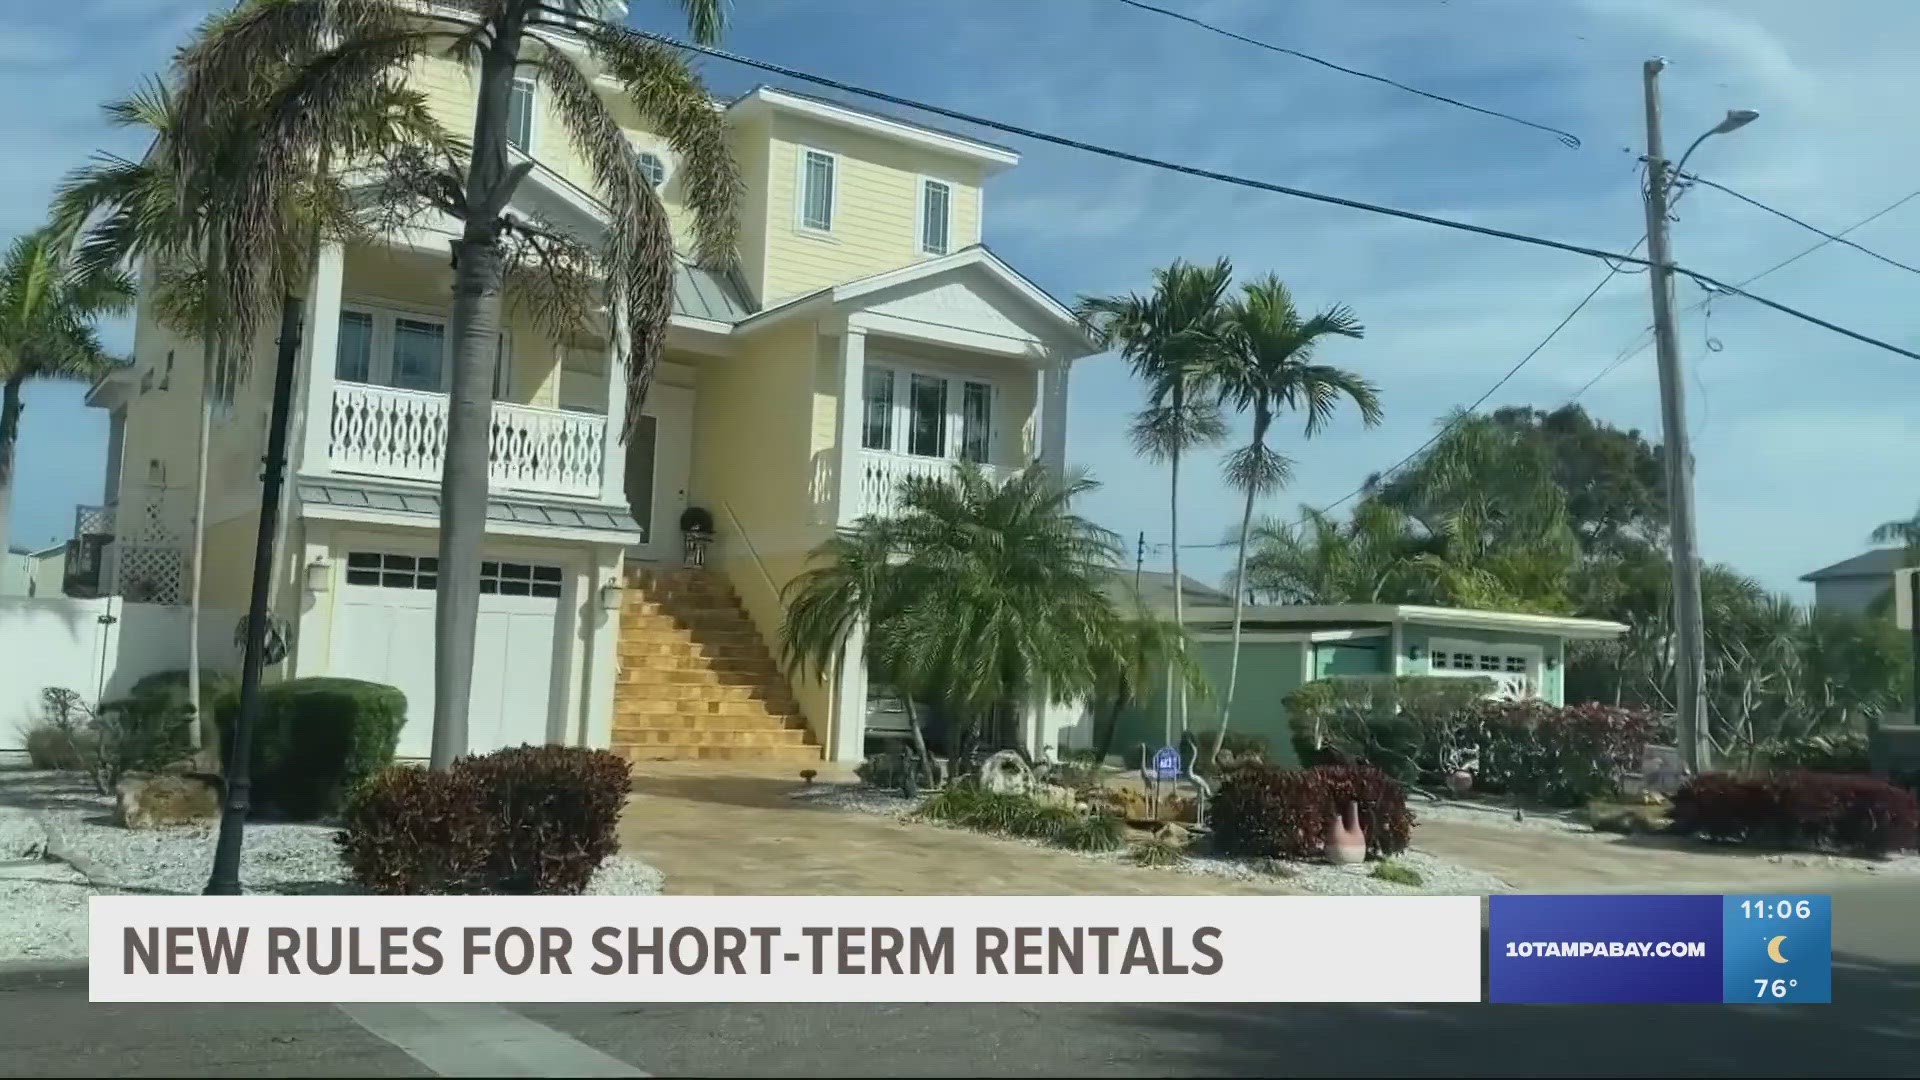 The attorney representing about 50 short-term rental owners said he believes this is one of the strictest ordinances on short-term rentals in the state.